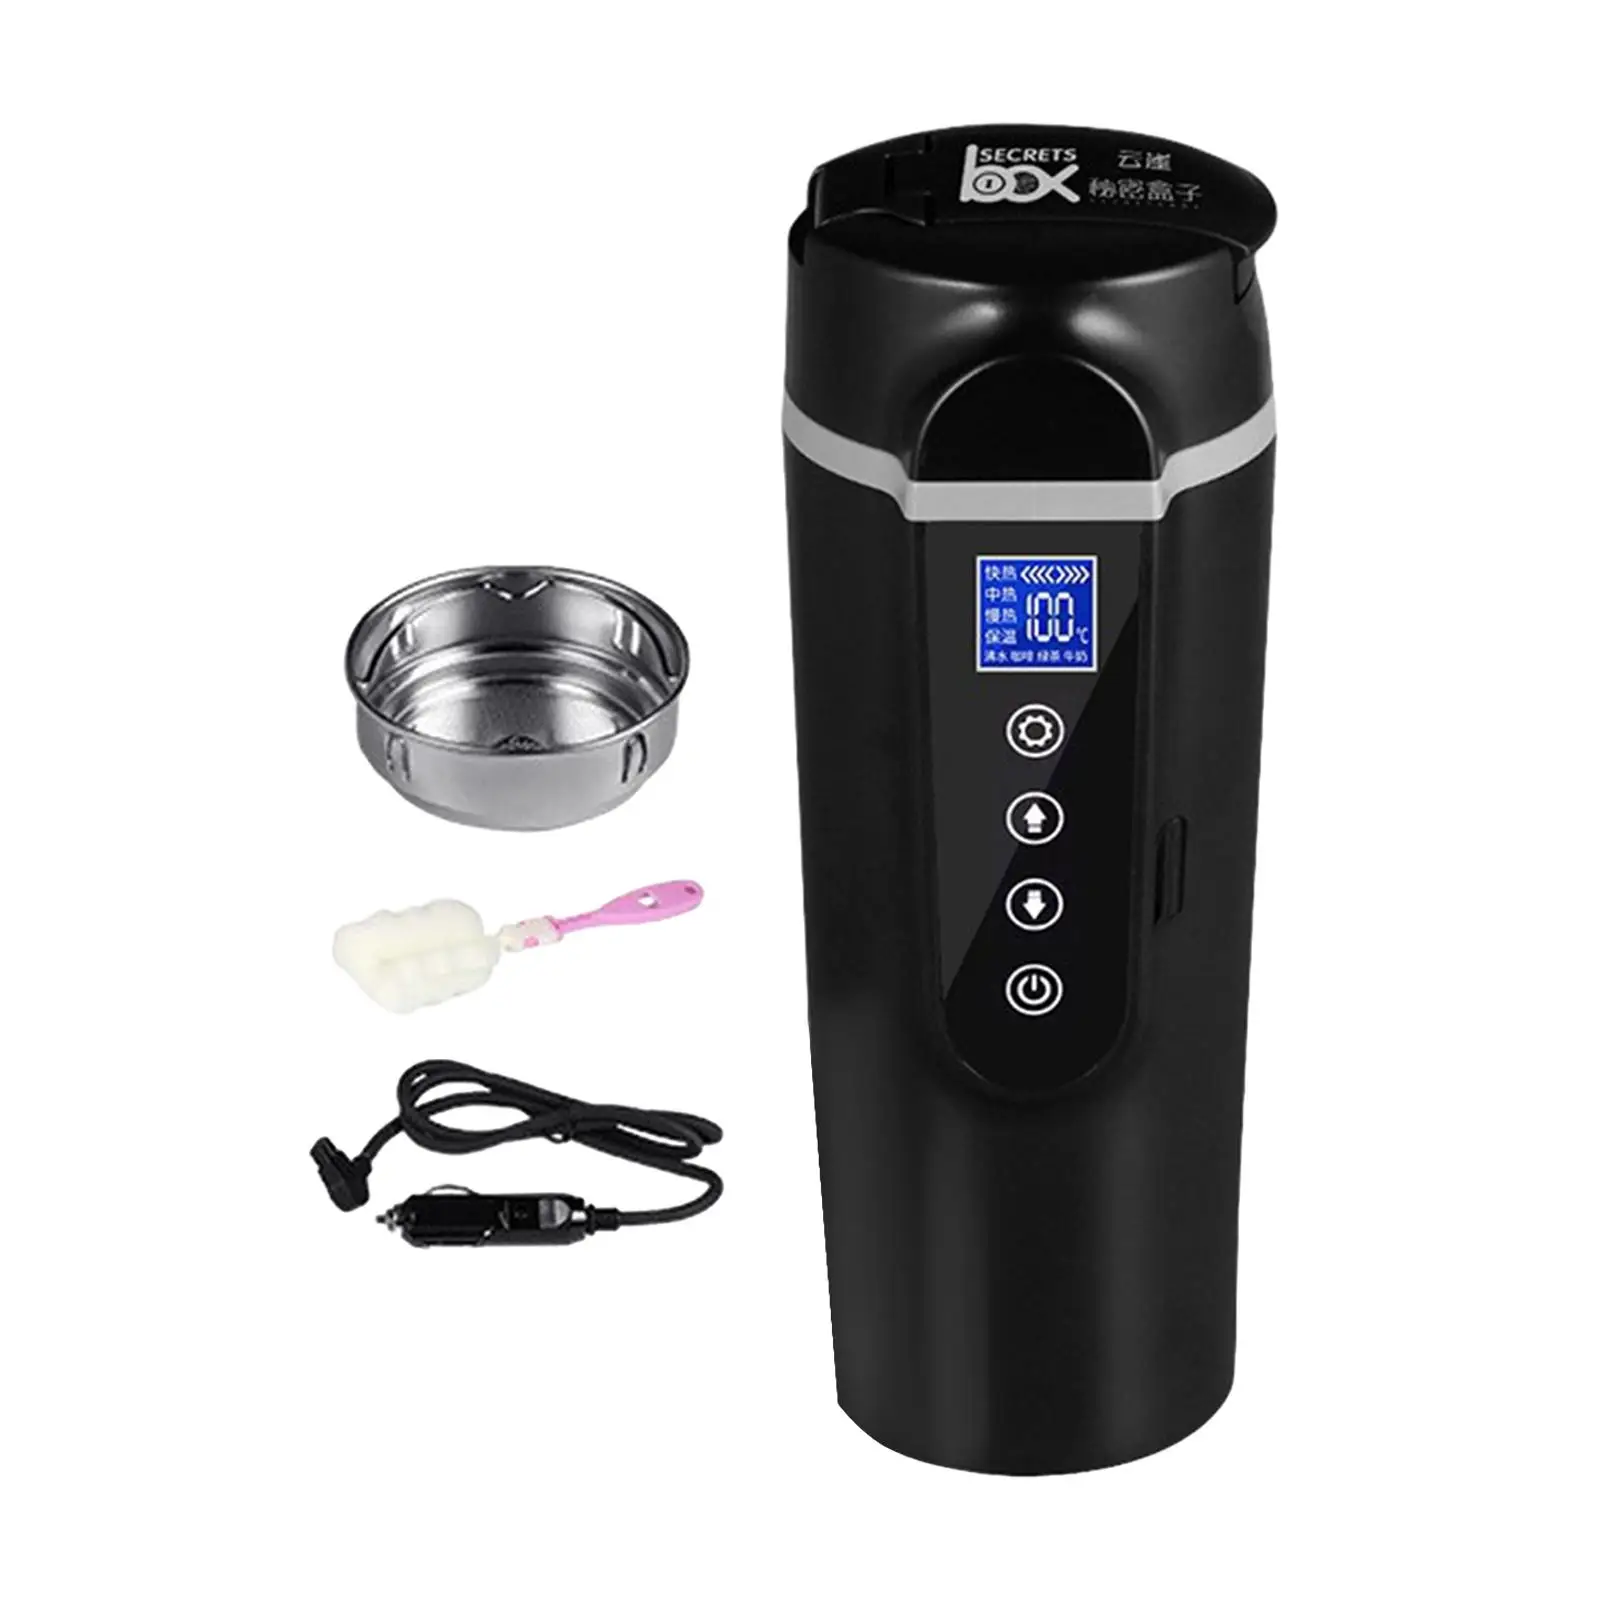 Car Heating Cup Water Boiler Electric Tea Kettle for Auto Car Trip Vehicles